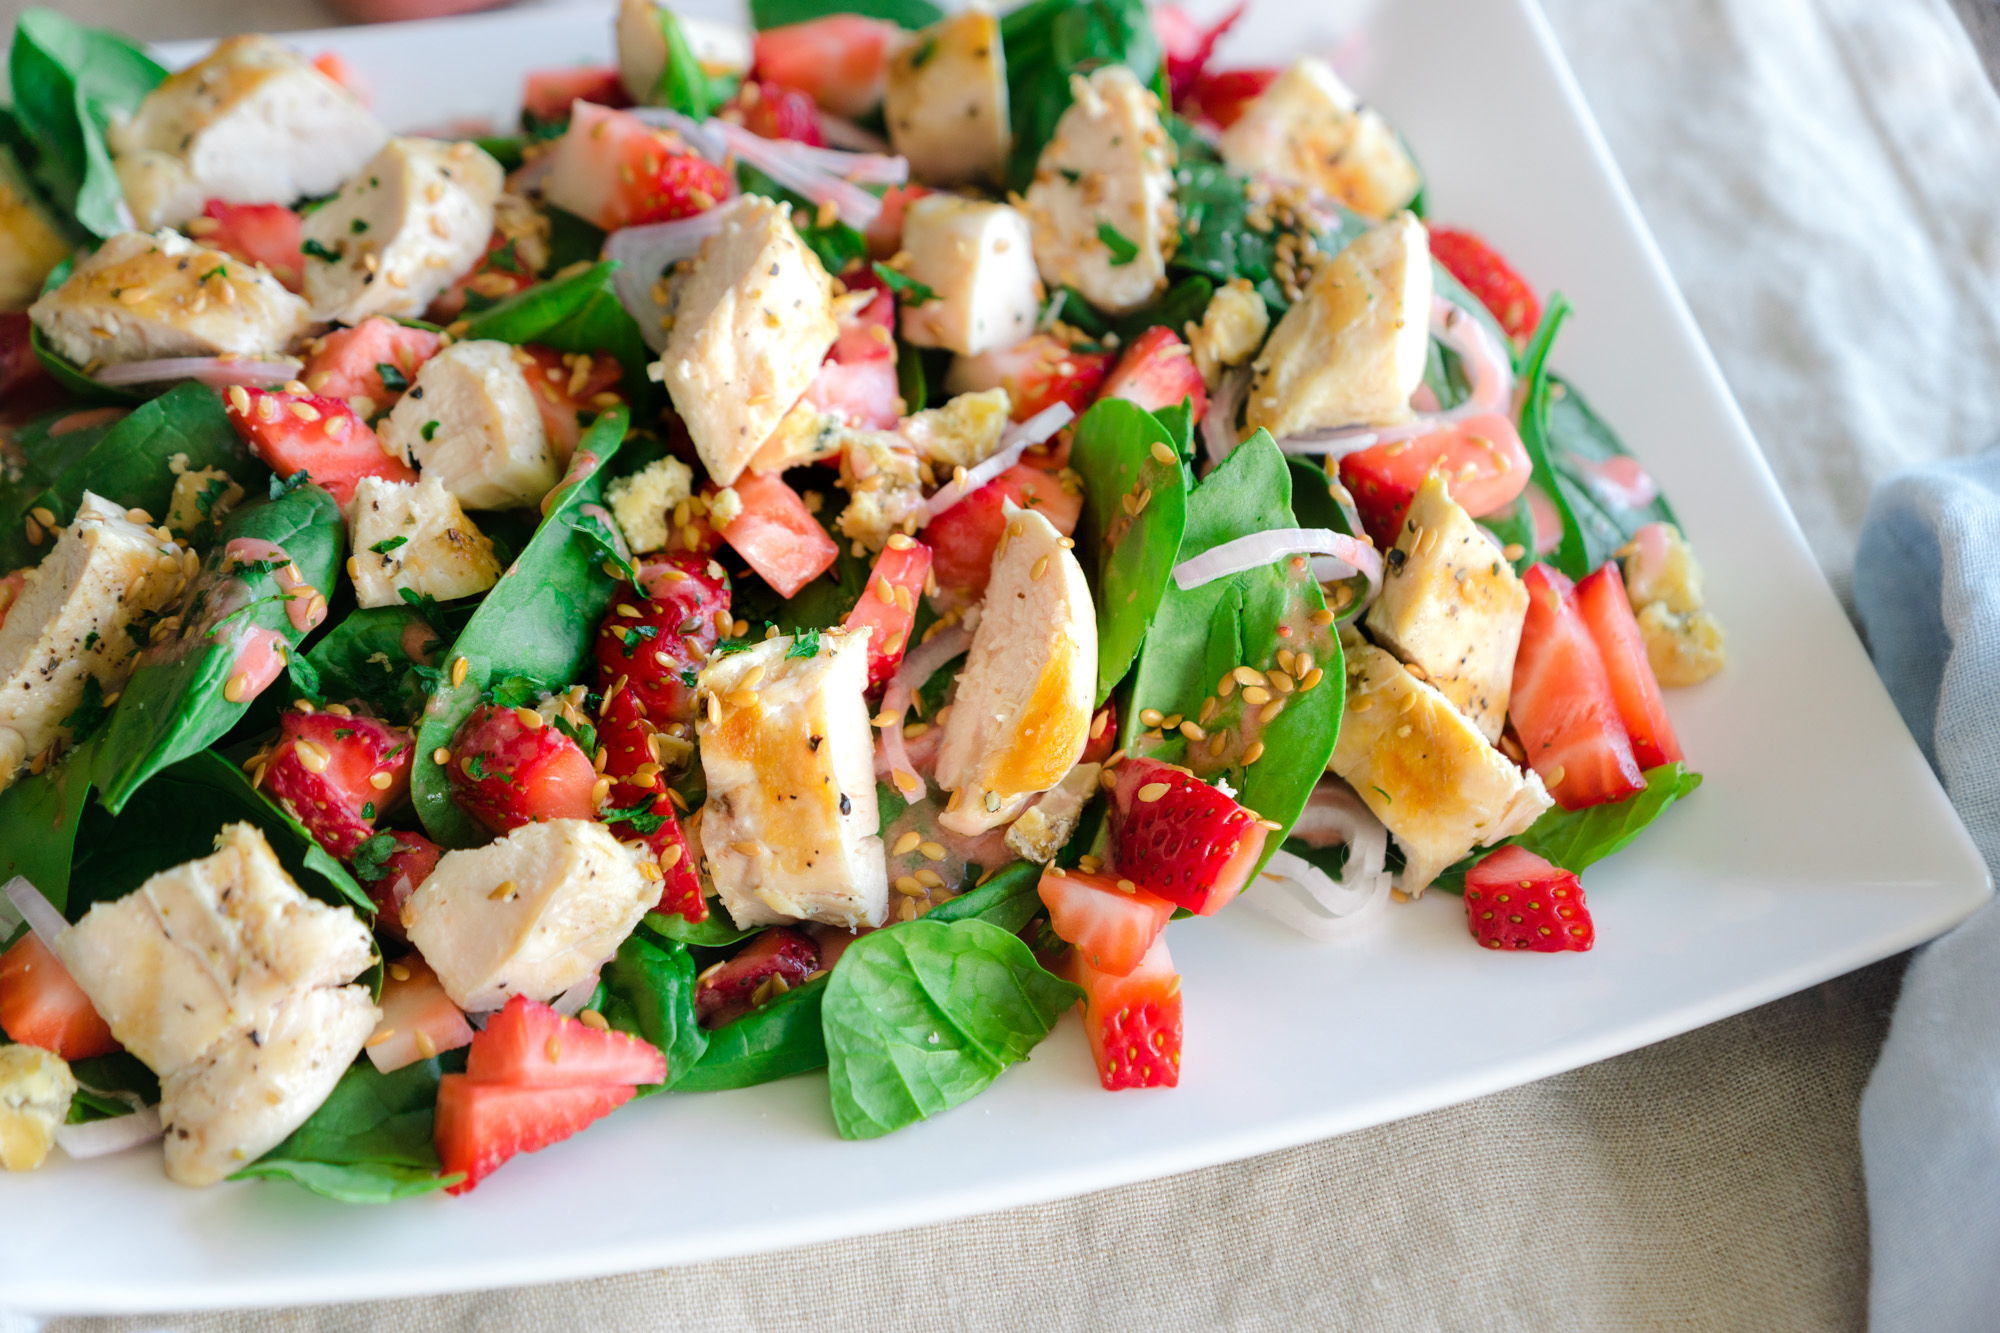 Rose McAvoy / For The Herald Spinach salad with grilled chicken